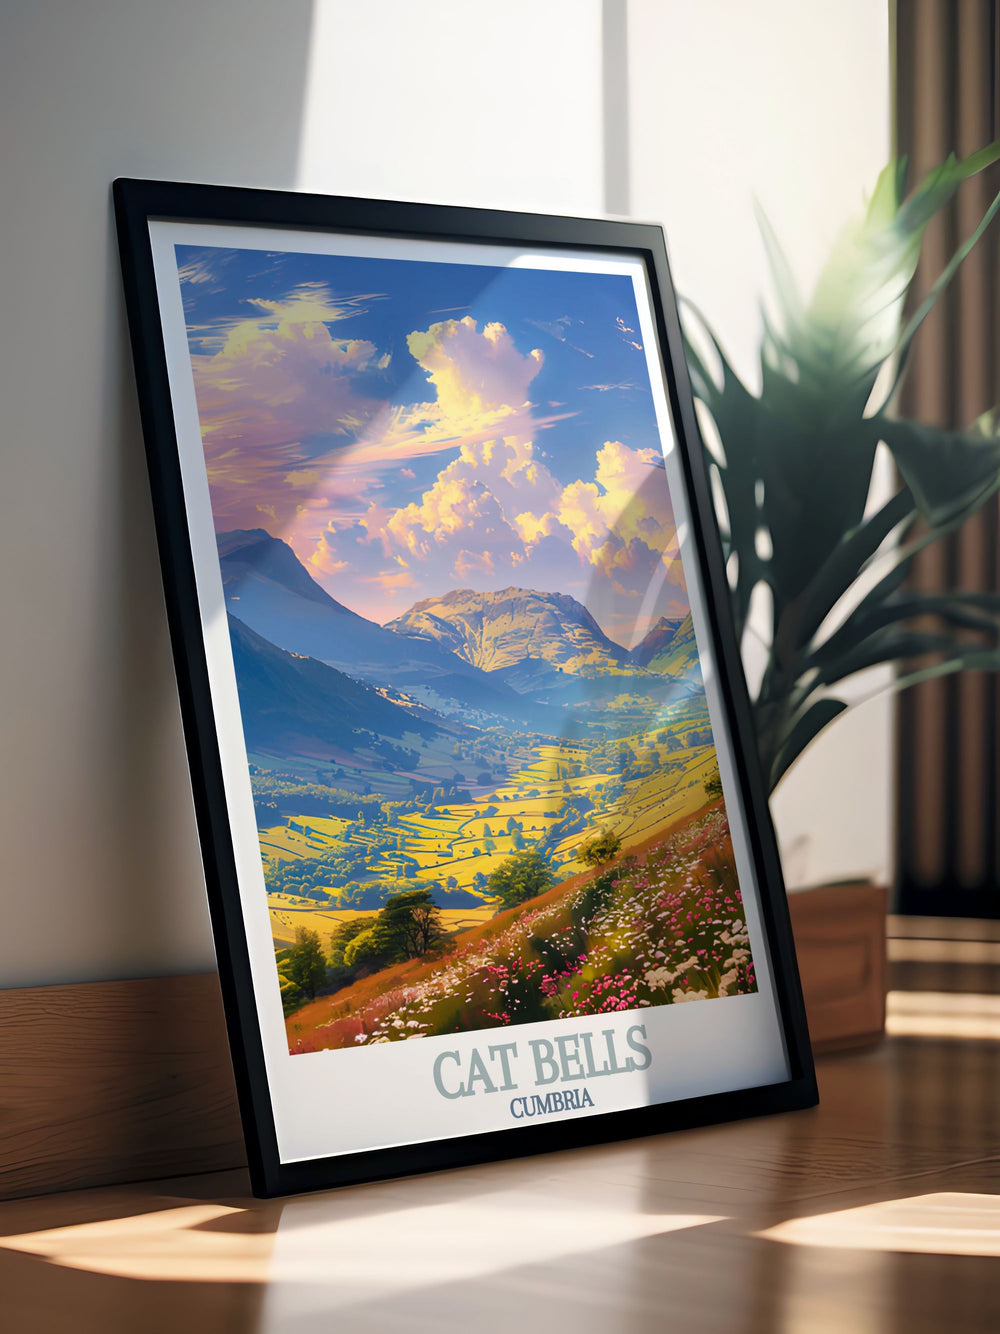 Beautiful Newlands Valley prints that bring the picturesque scenery of the Lake District into your home perfect for UK home decor these Cumbria travel prints make an excellent addition to your wall decor and a thoughtful gift for nature lovers.